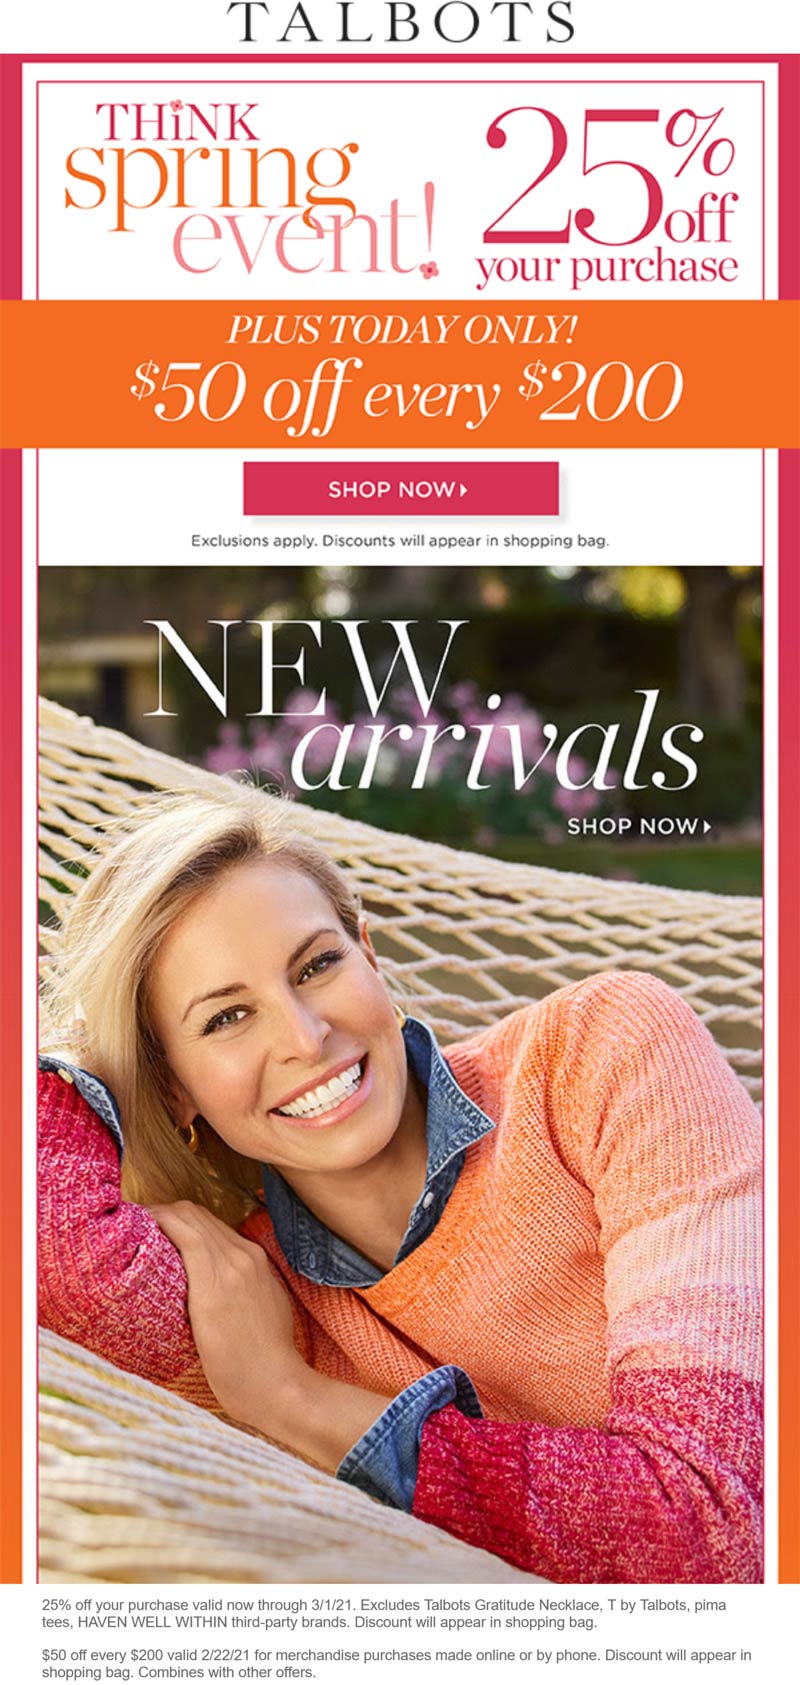 Talbots stores Coupon  25% off + $50 off every $200 today at Talbots #talbots 